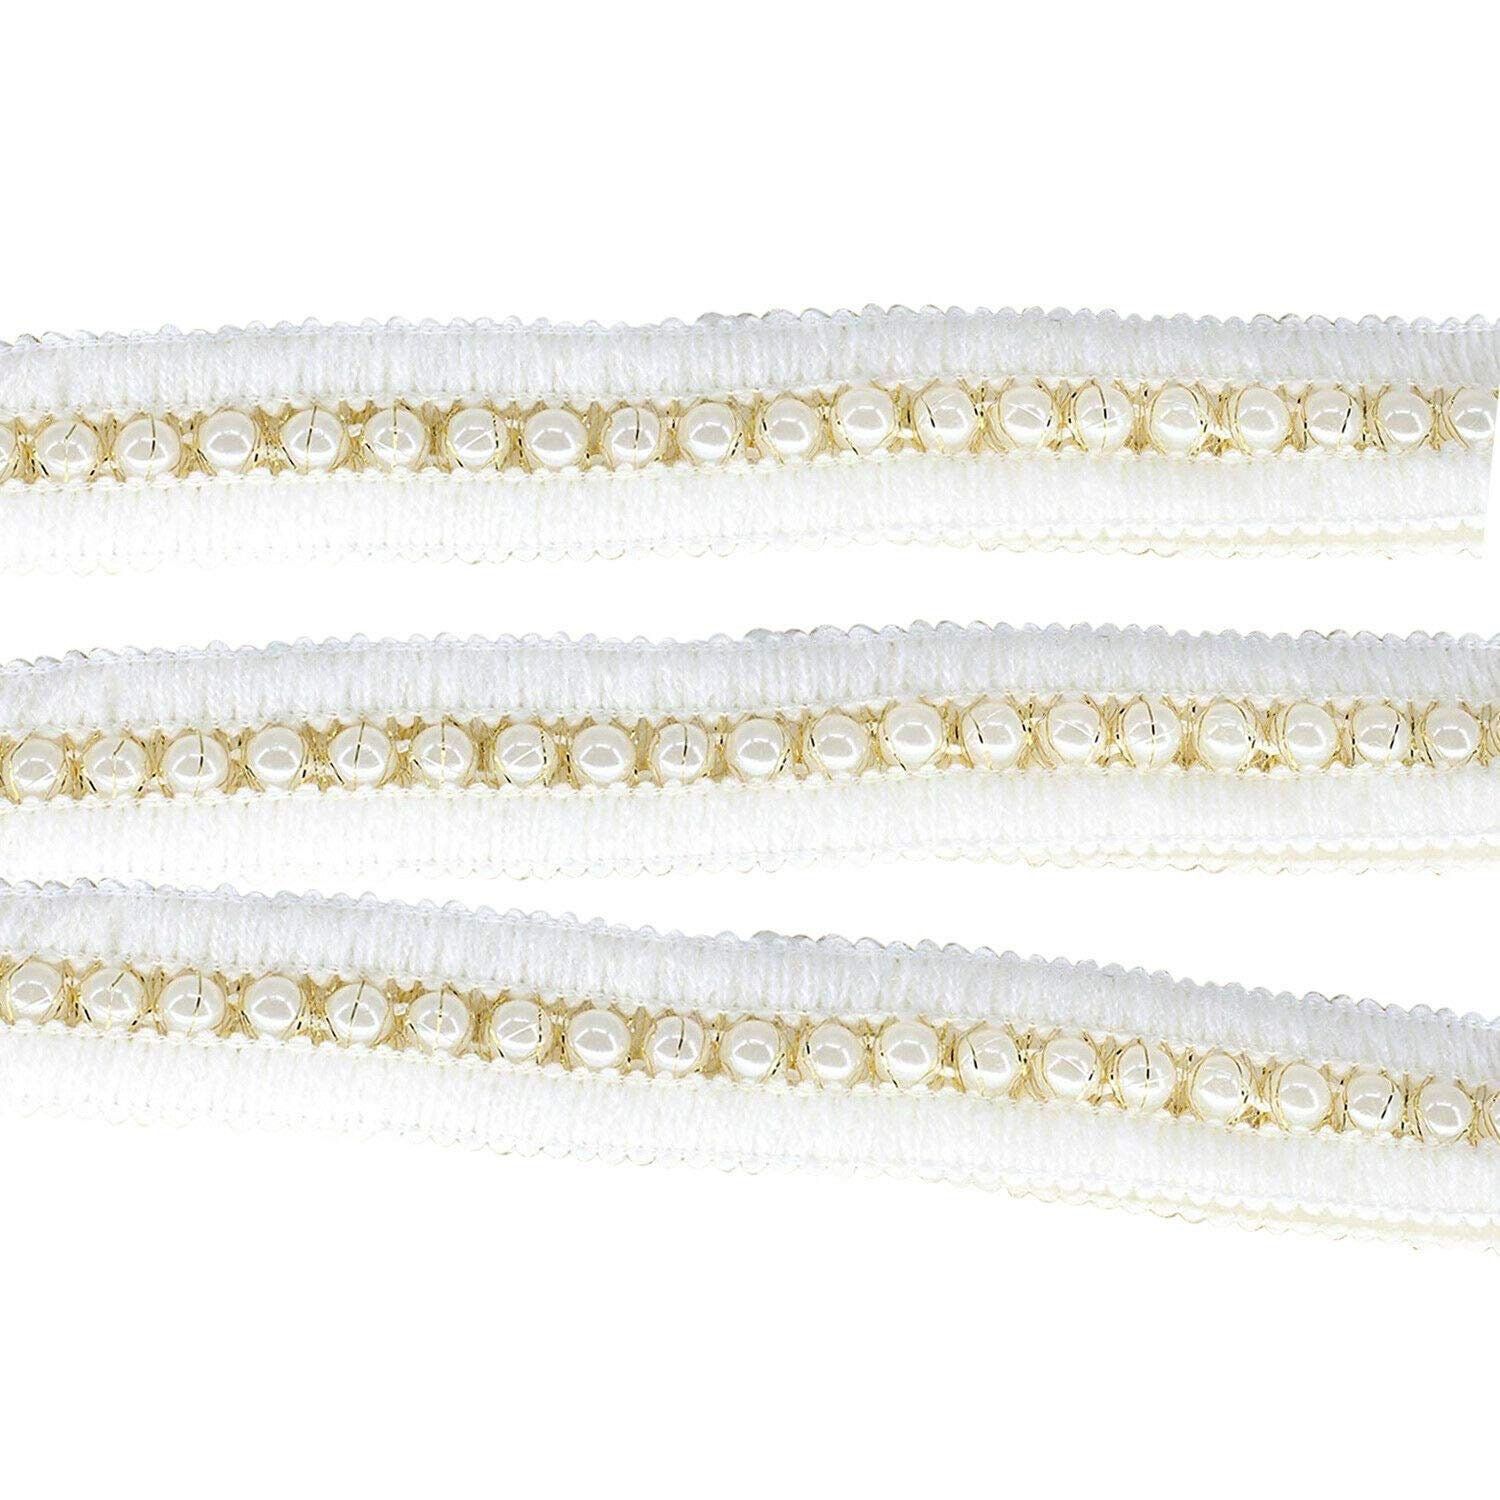 Trimming Shop 40mm wide White Grommet Studded Embroidery Trim Knitting Lace  Diamante Eyelets, 1meter 